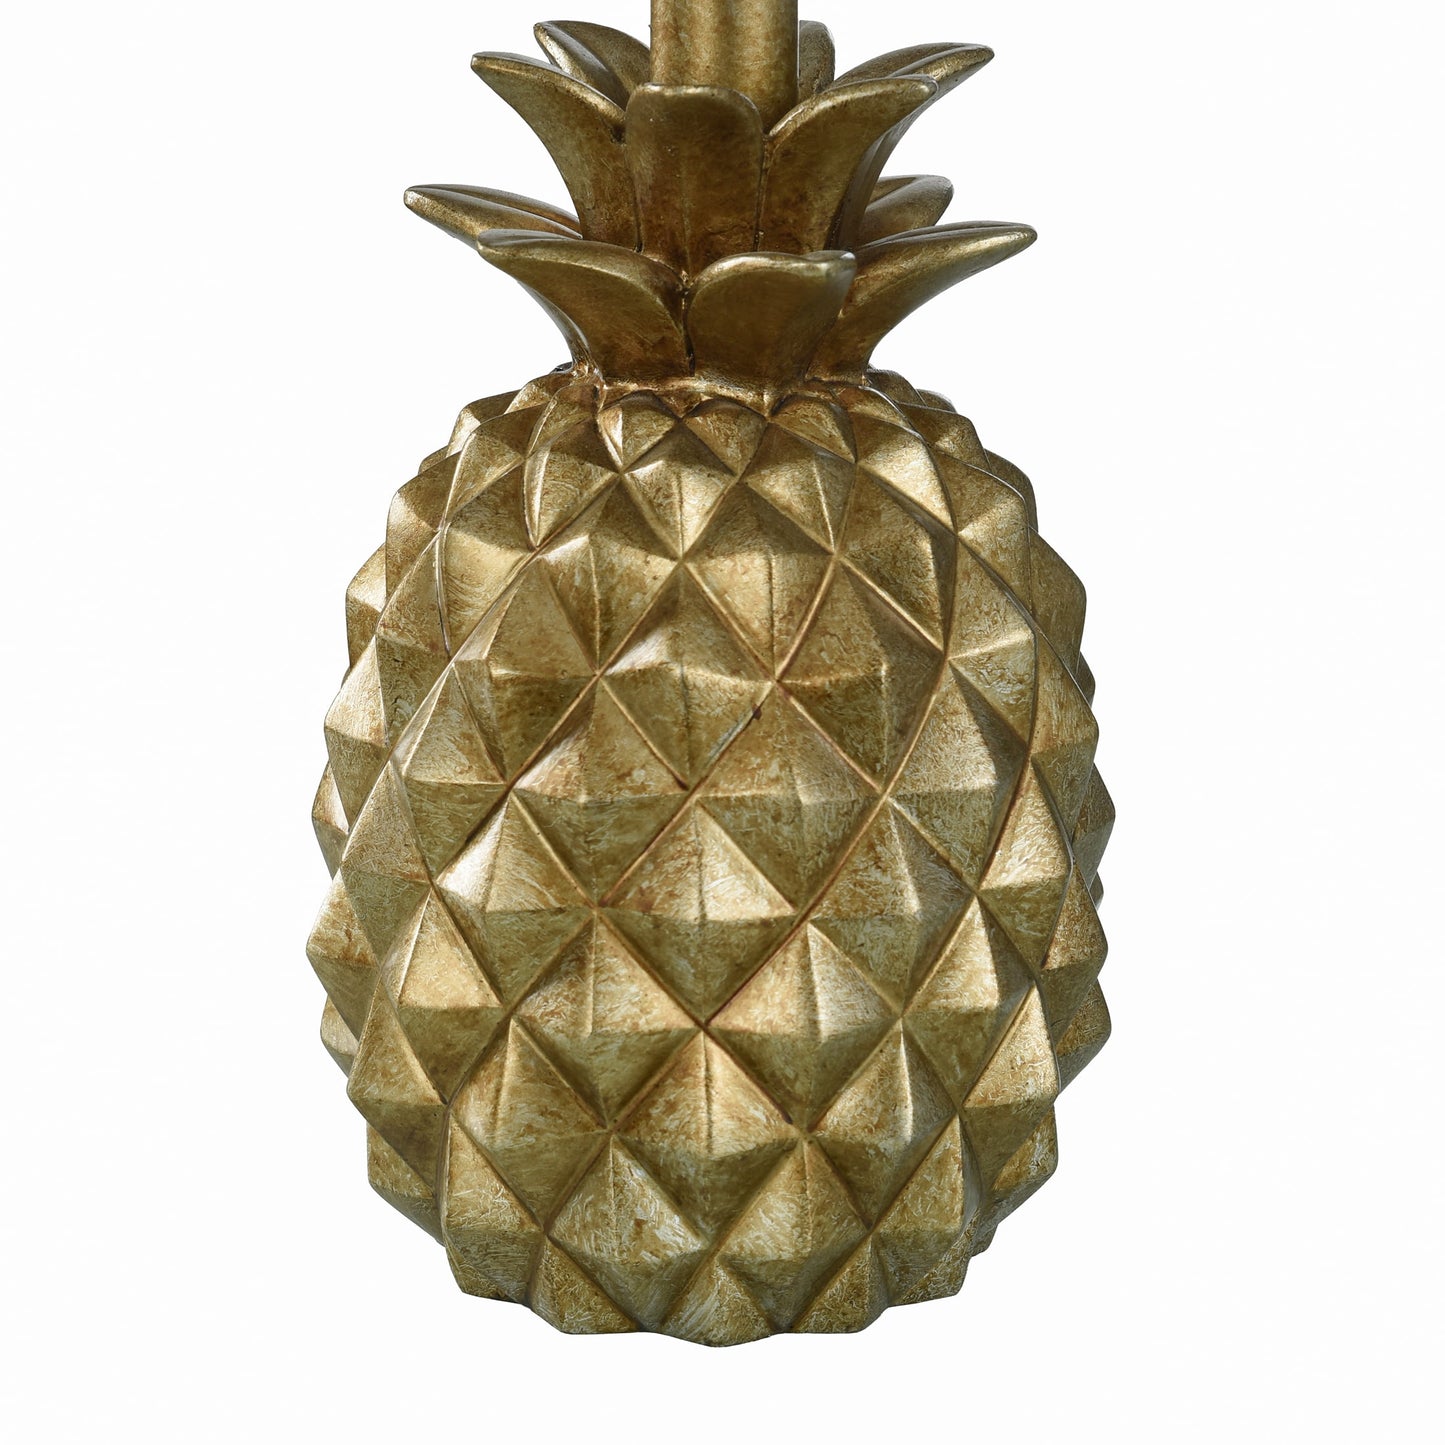 Distressed Pineapple 17” Table Lamp with Empire-Style Shade, Textured Gold